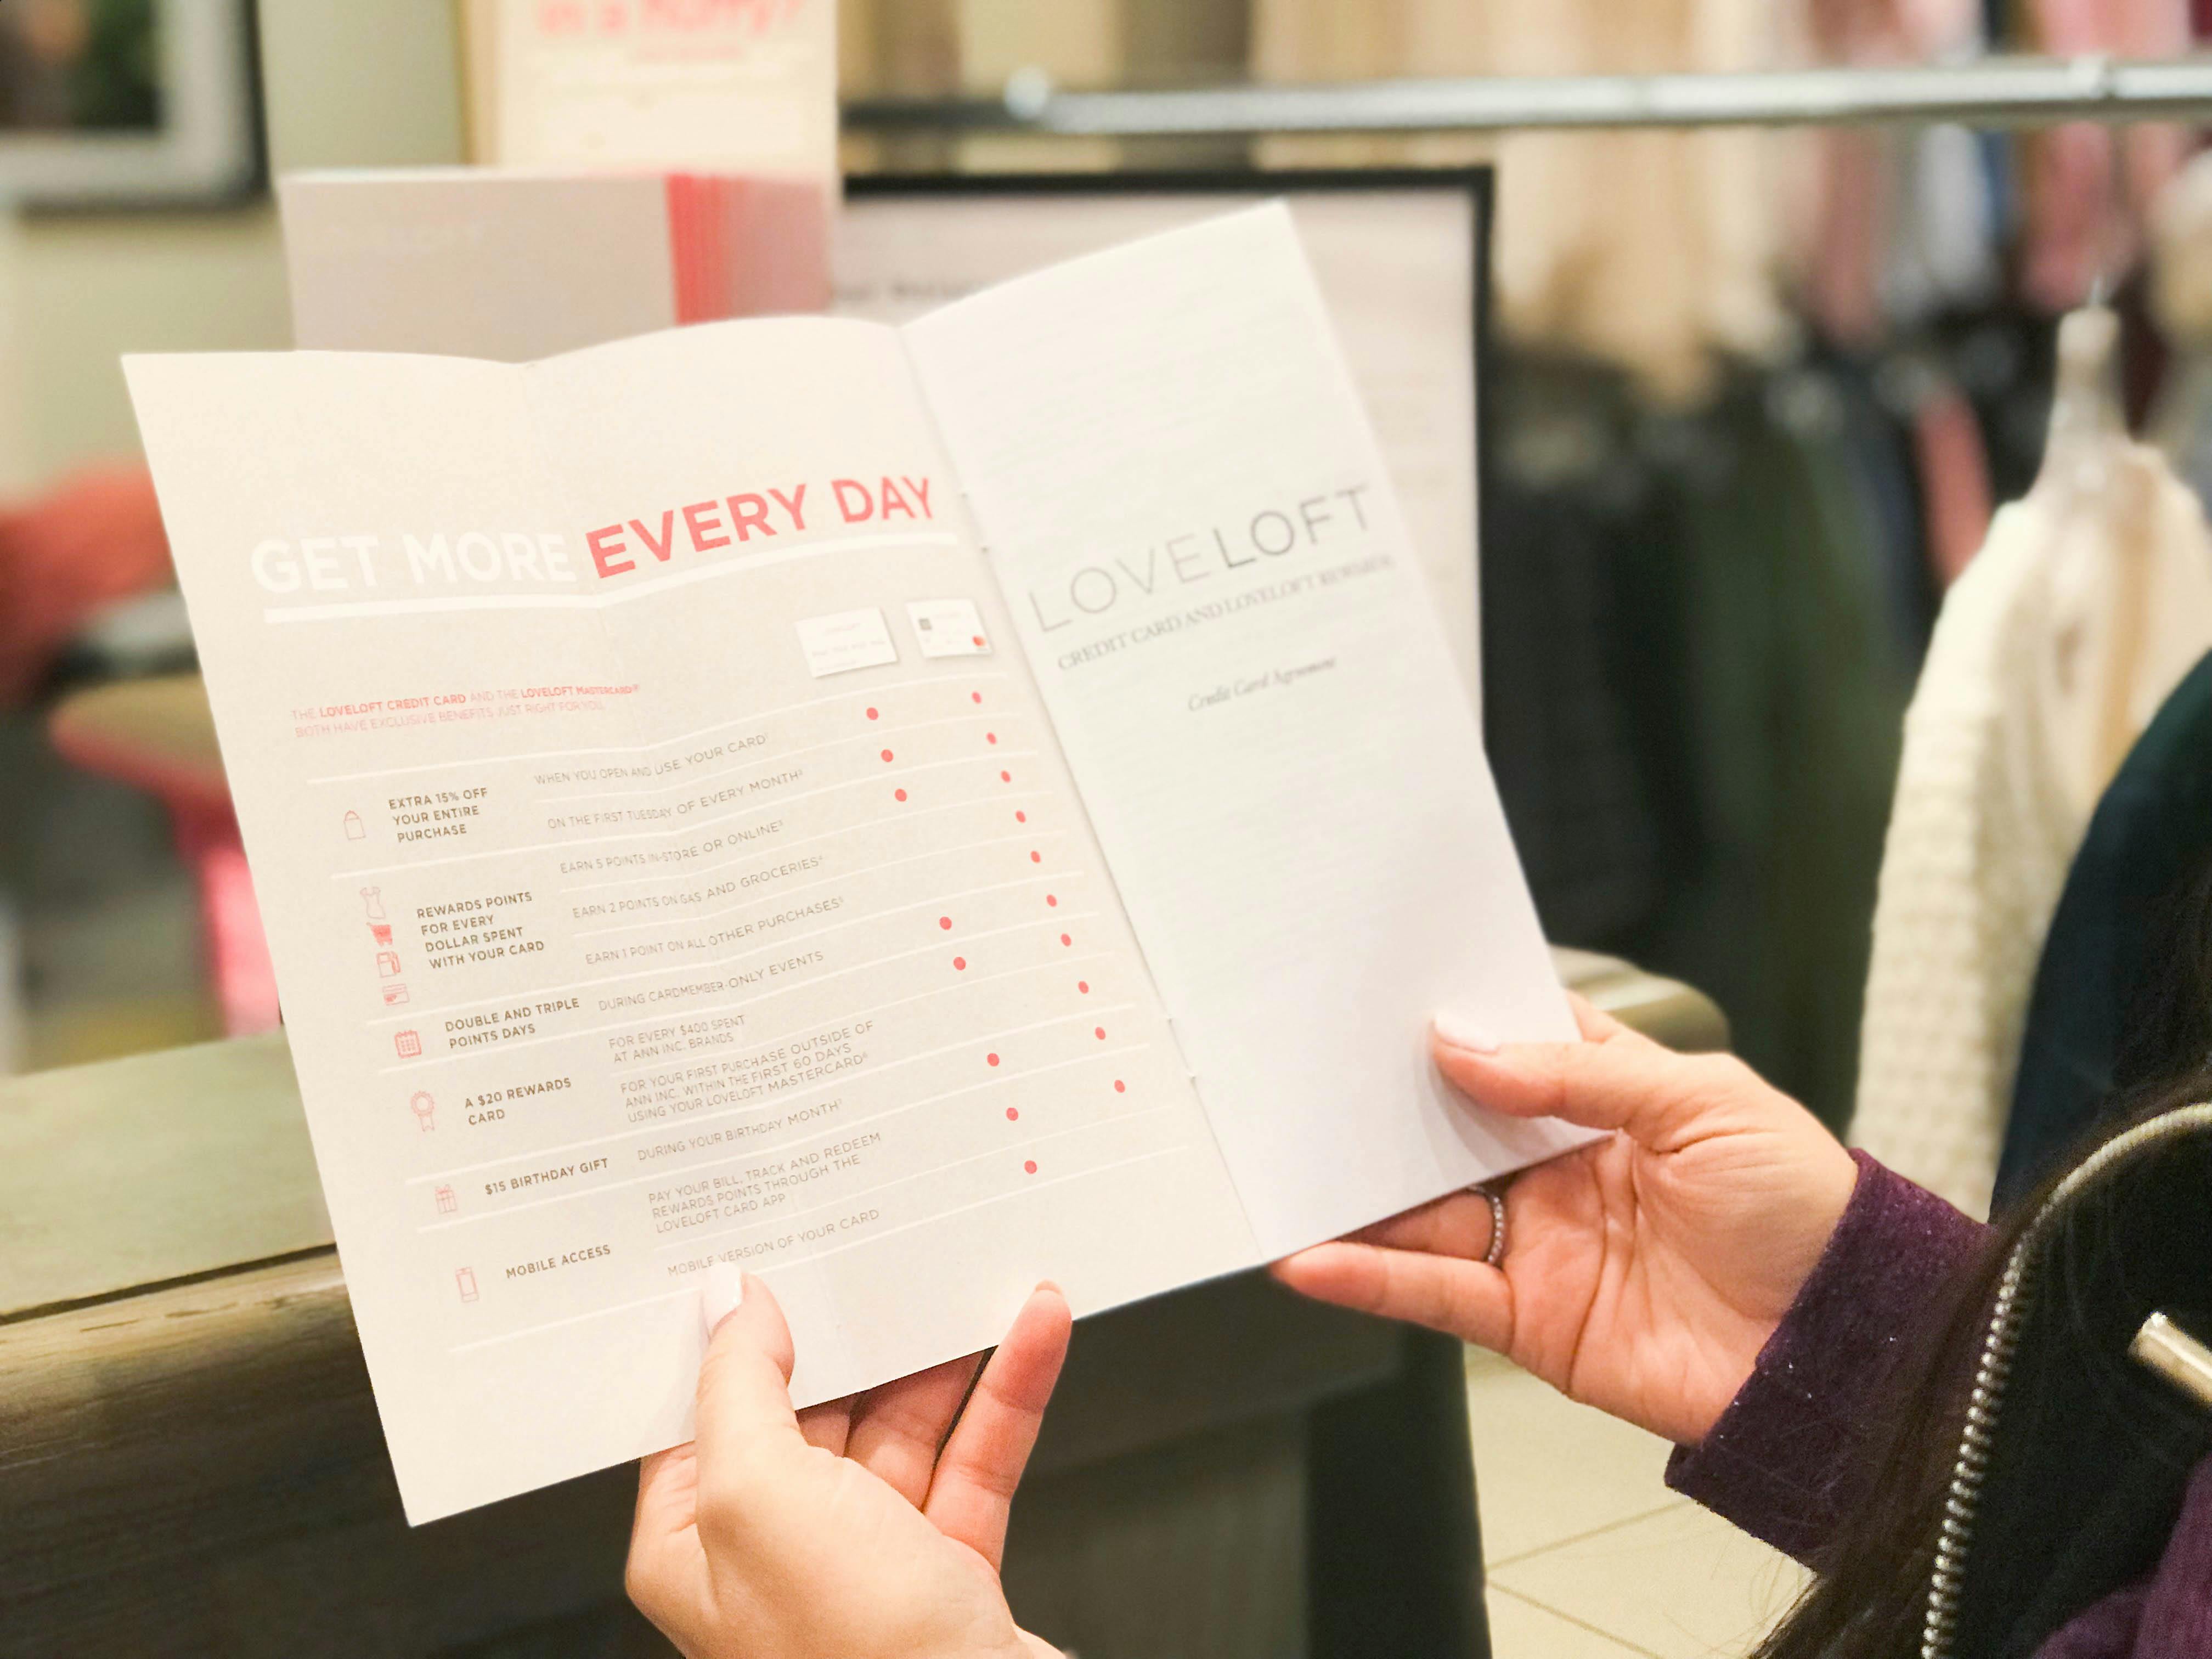 20 Simple Steps To Shop At Loft Like A Pro The Krazy Coupon Lady [ 3024 x 4032 Pixel ]